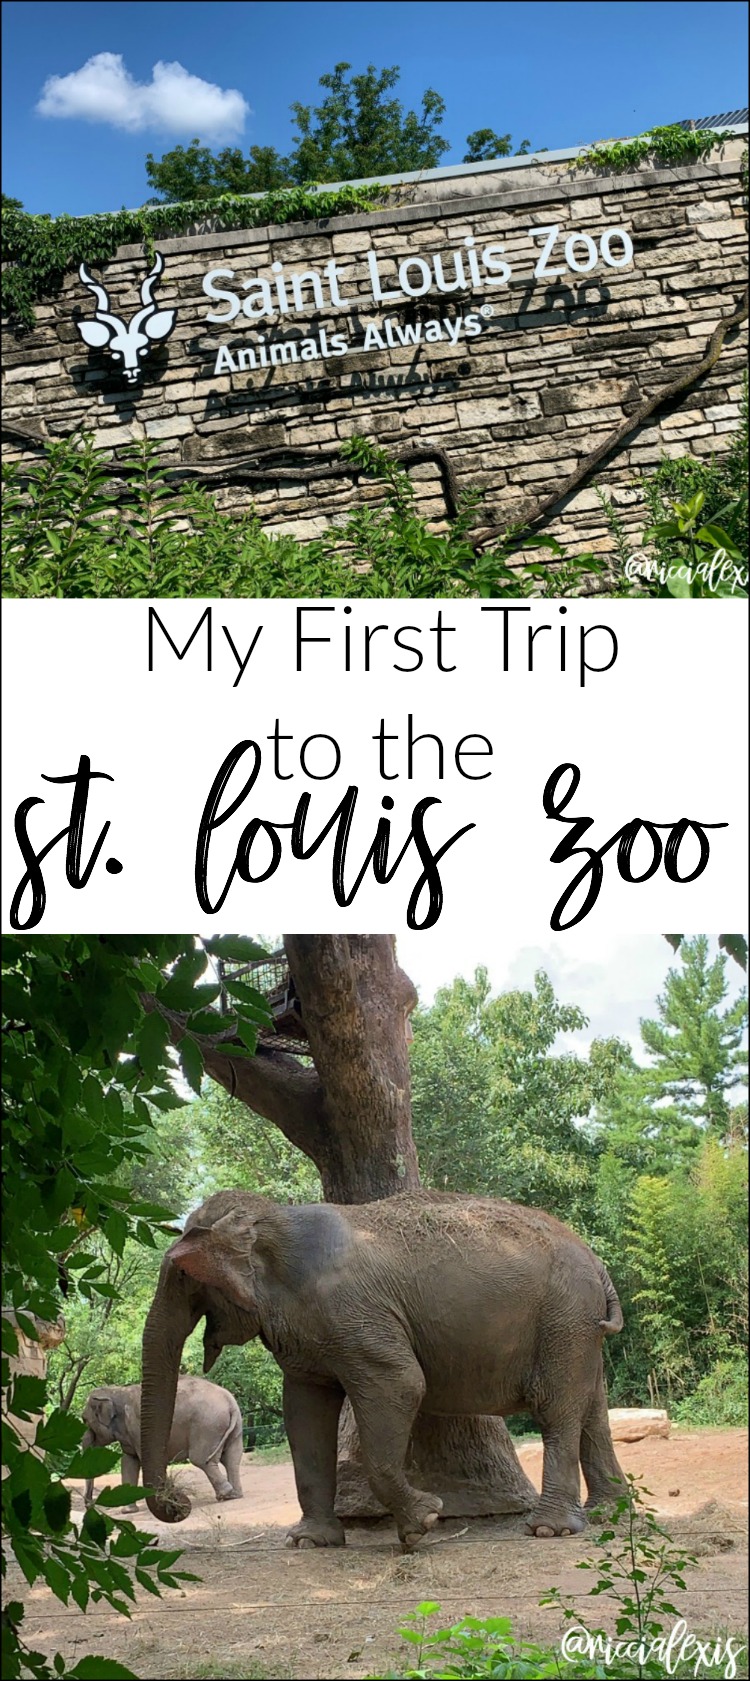 My First Trip to the St. Louis Zoo